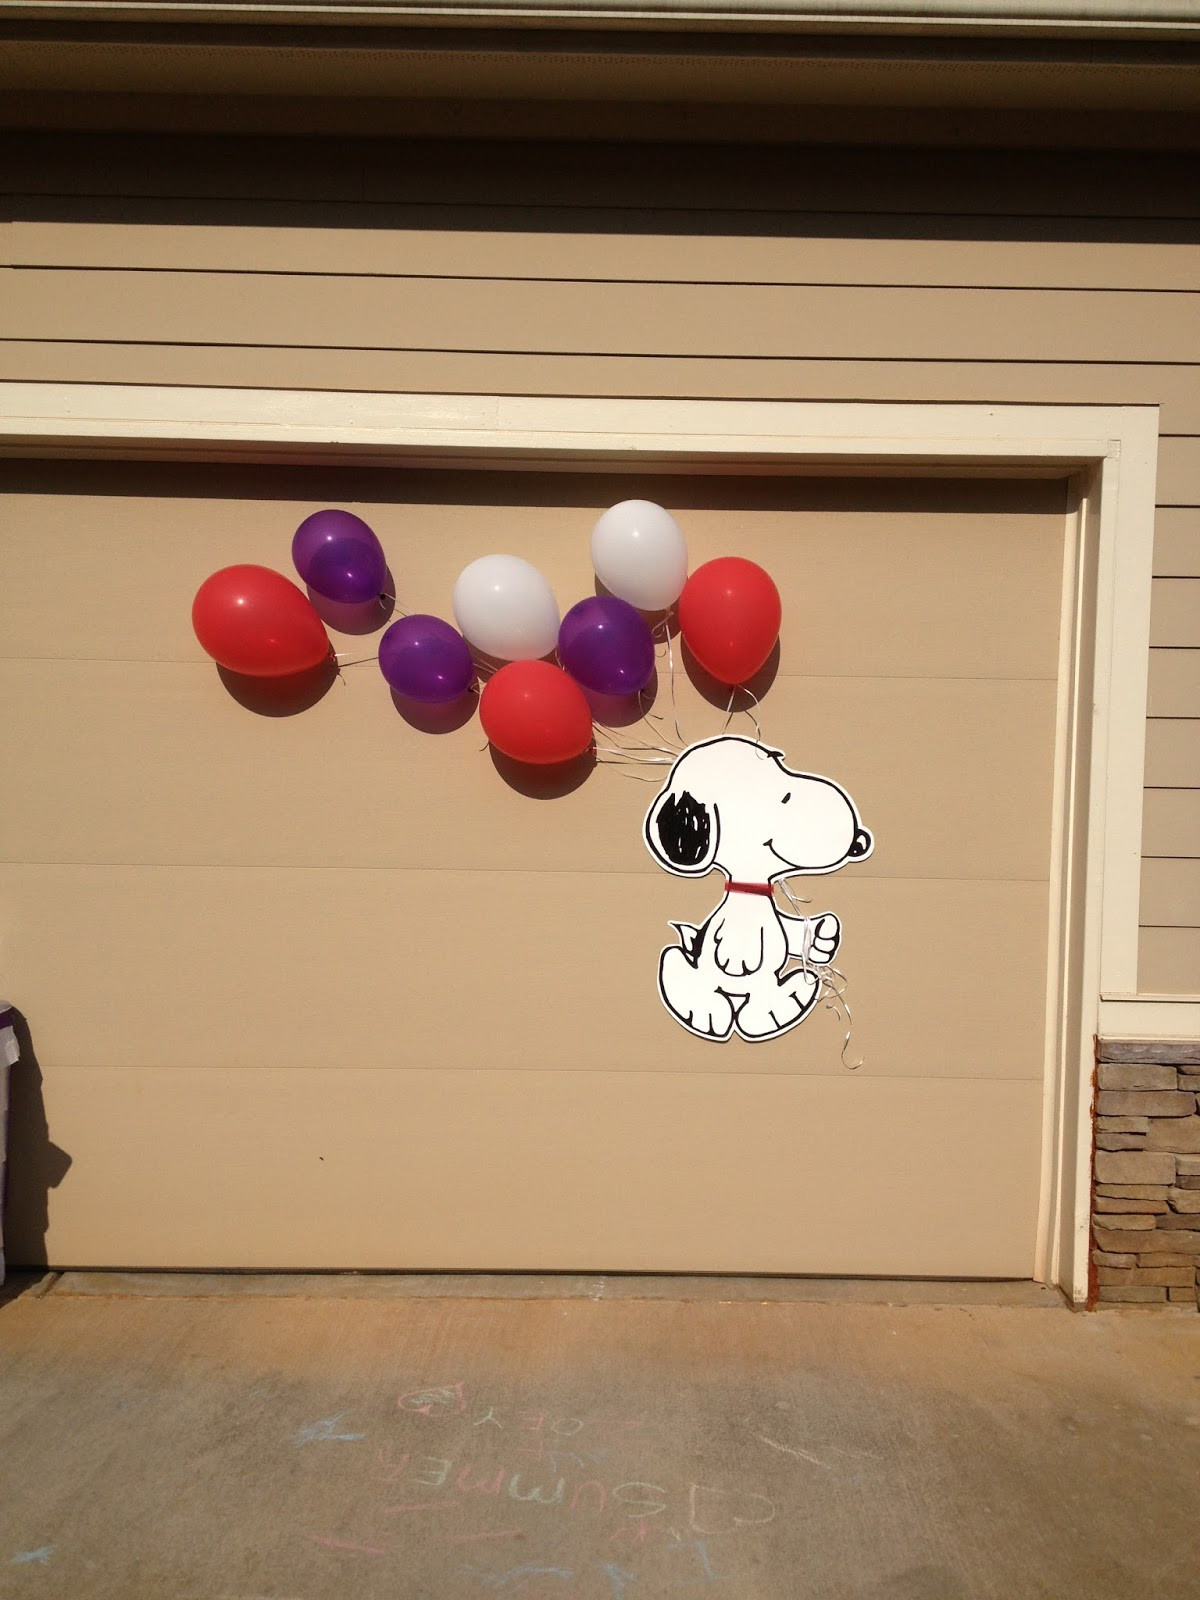 Snoopy Birthday Decorations
 Planning for a Snoopy Birthday Party